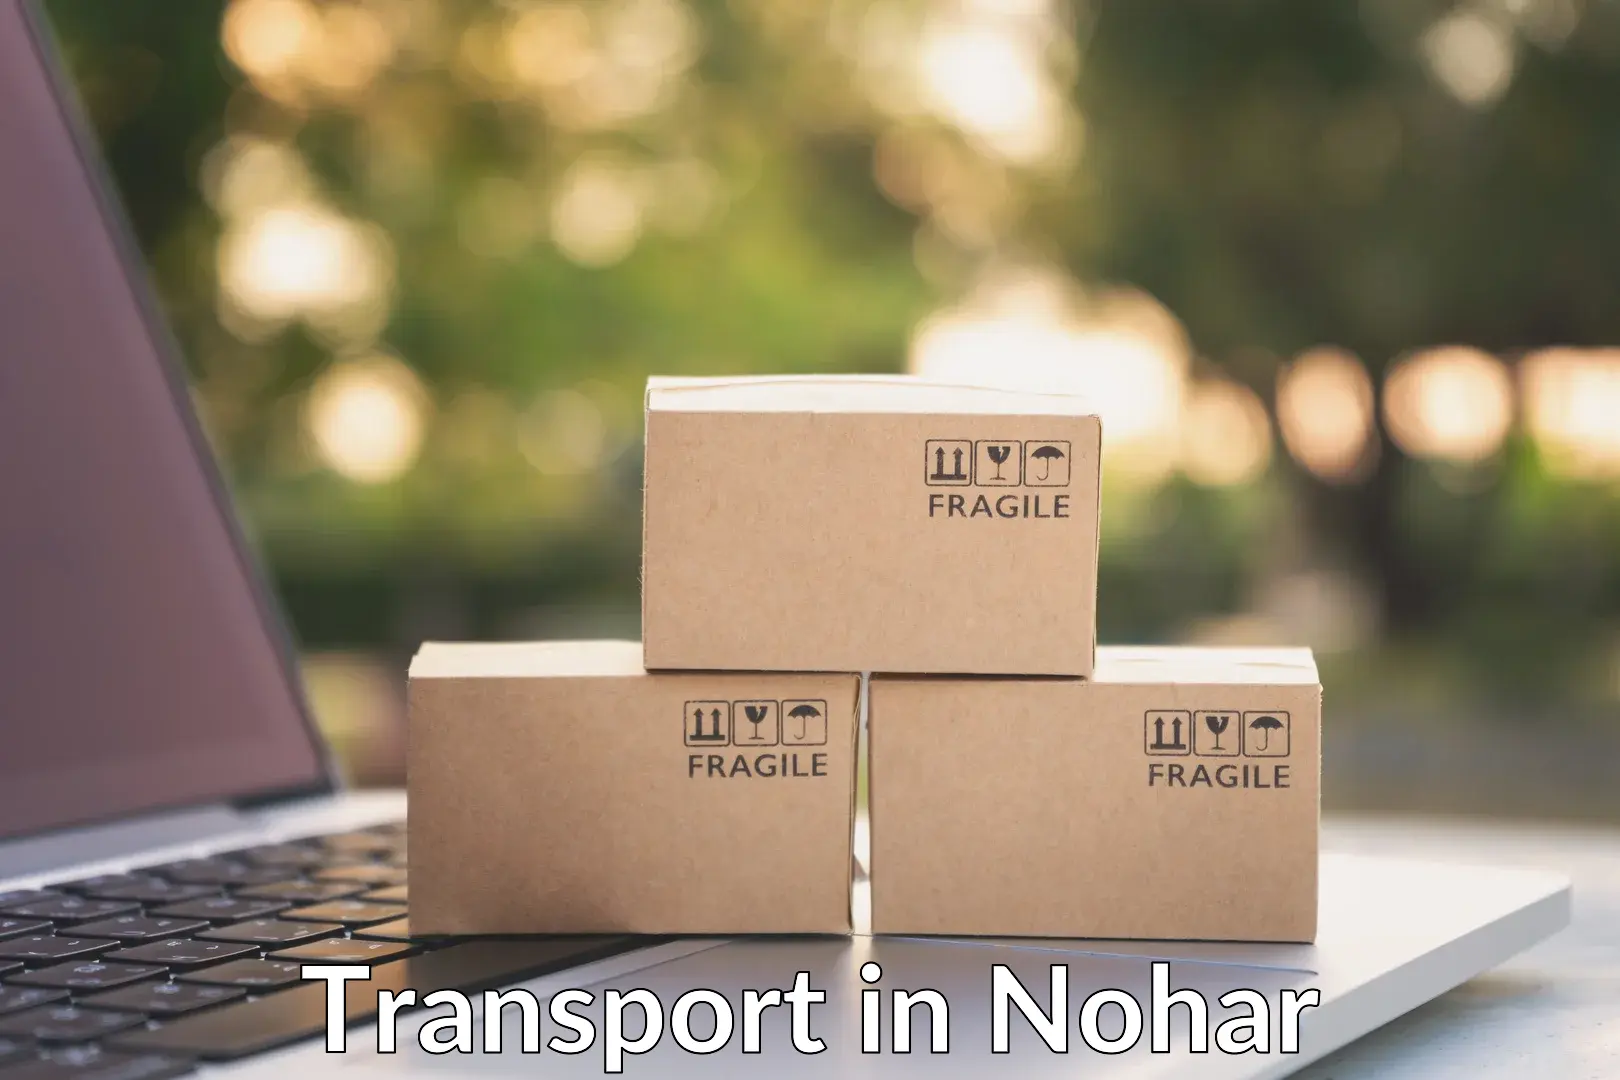 Transport shared services in Nohar